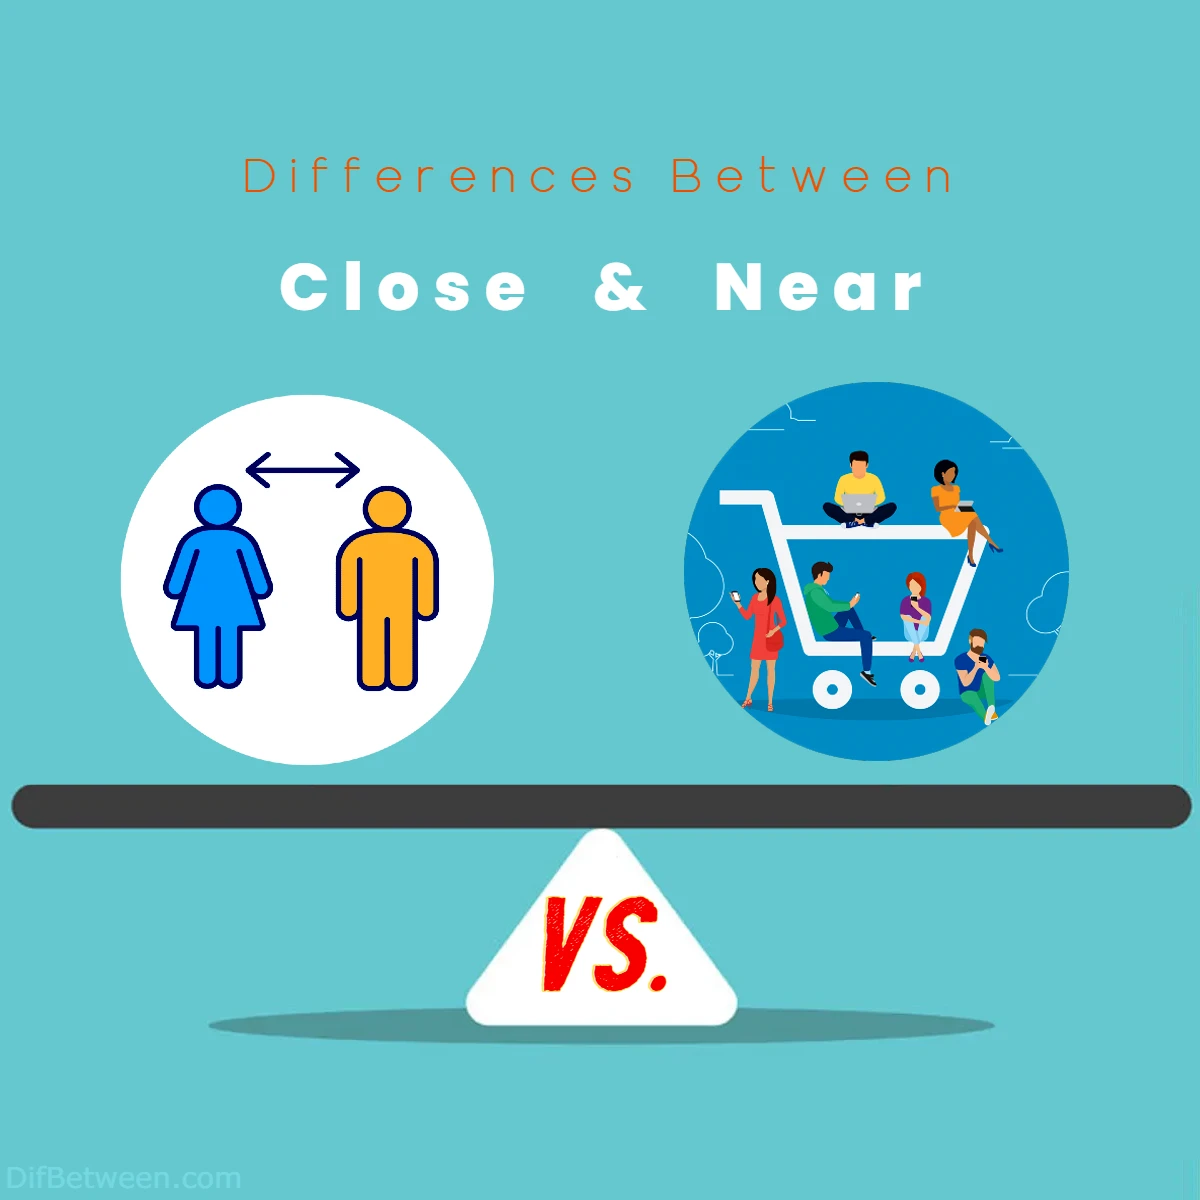 Differences Between Close vs Near